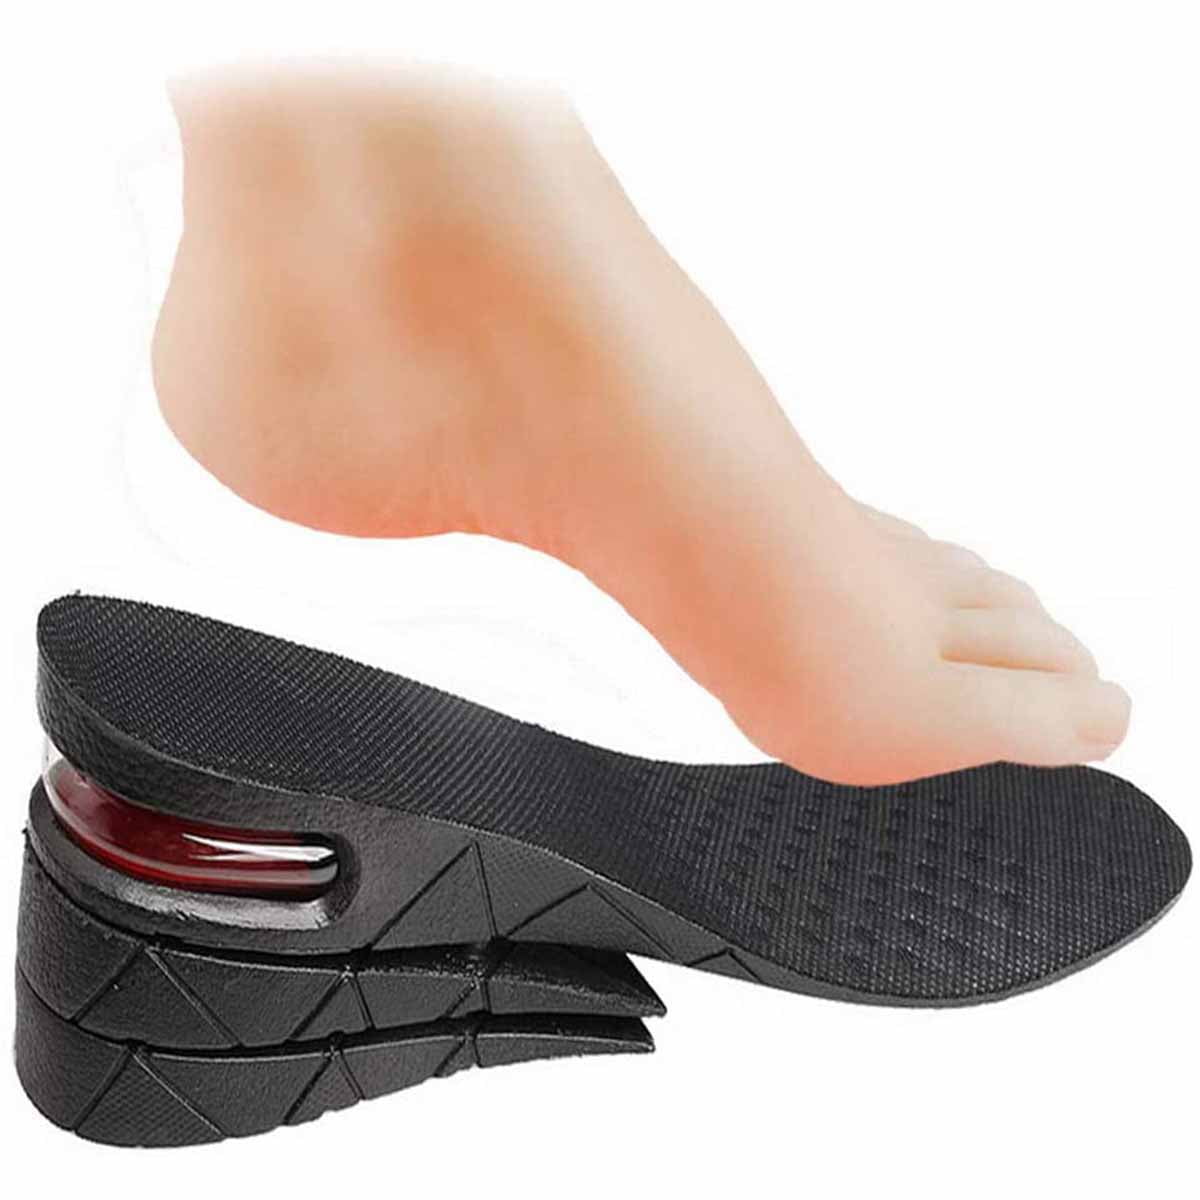 Men Women Invisible Height Increase Insoles Heel Lift Taller Shoe Inserts Pad US 